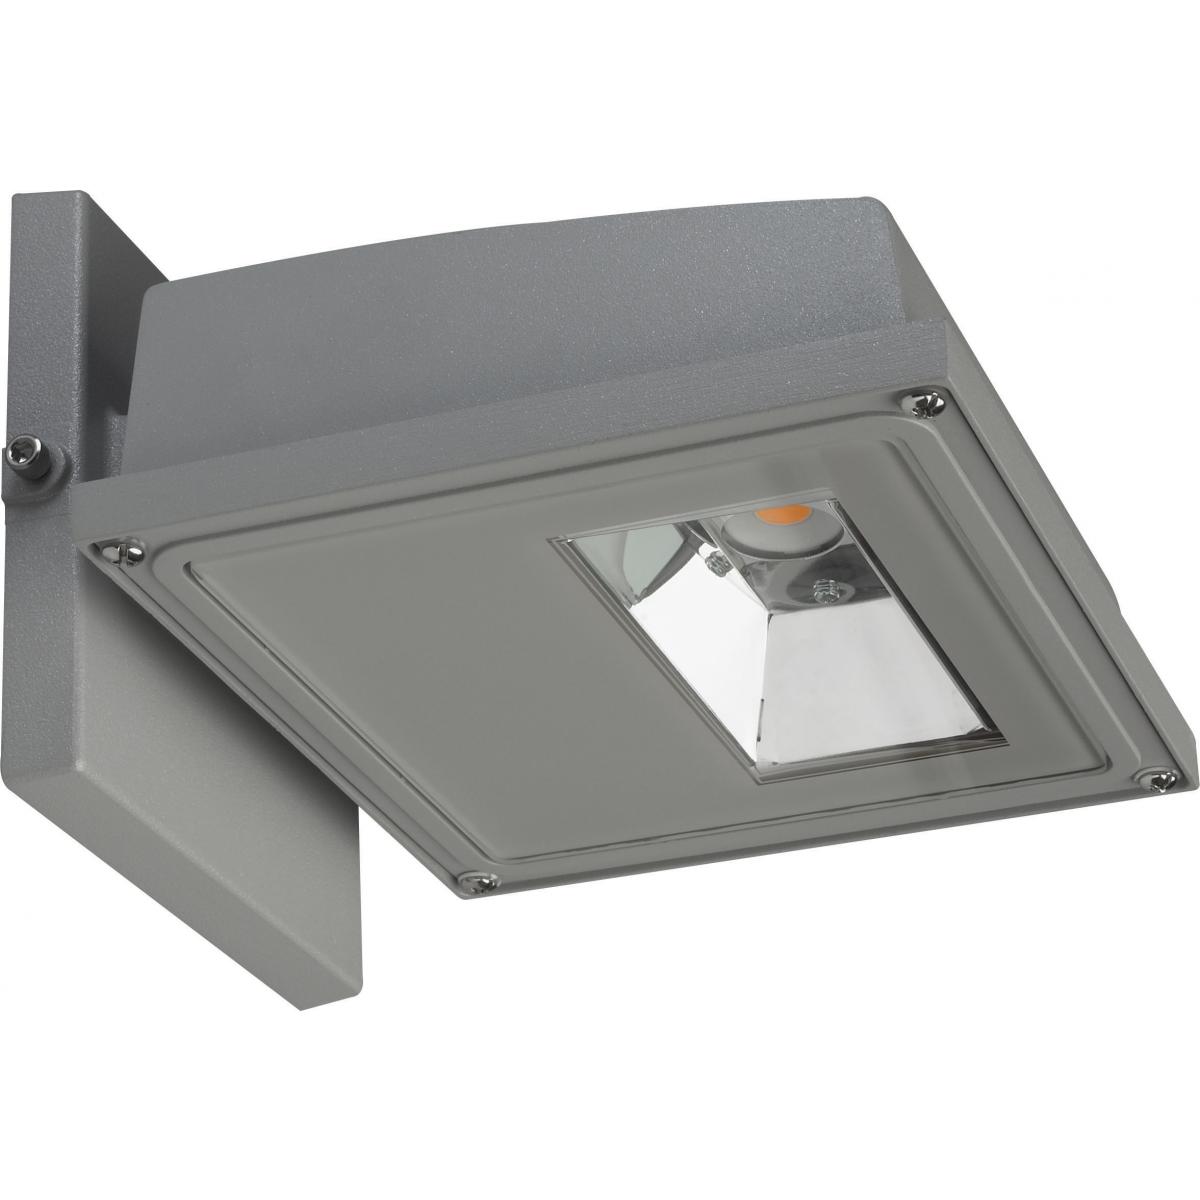 65-156 15W LED WALL PACK GRAY 4000K